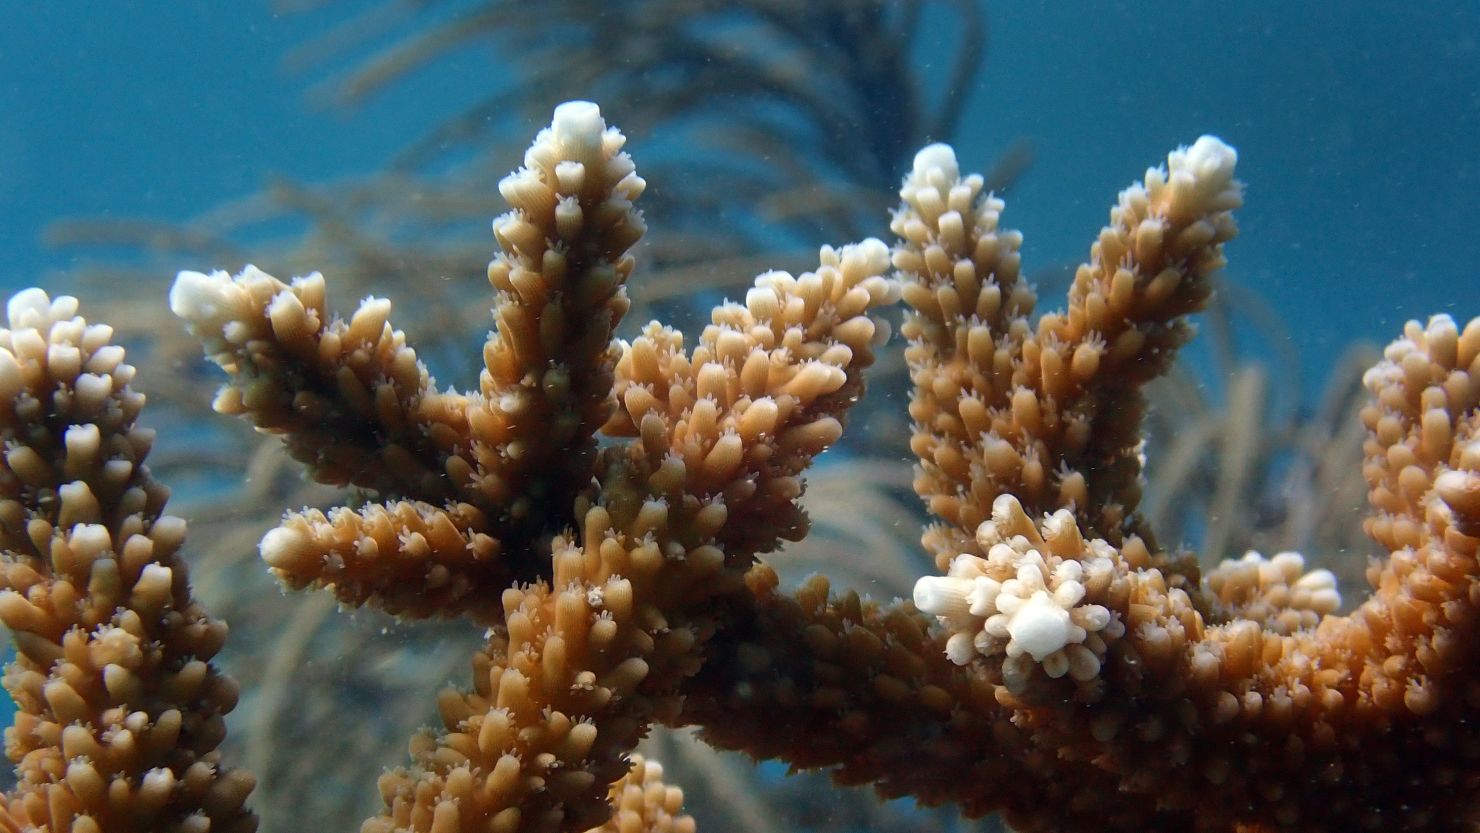 Staghorn coral showing signs of distress from the hot ocean temperatures in the Florida Keys, on July 24, 2023.